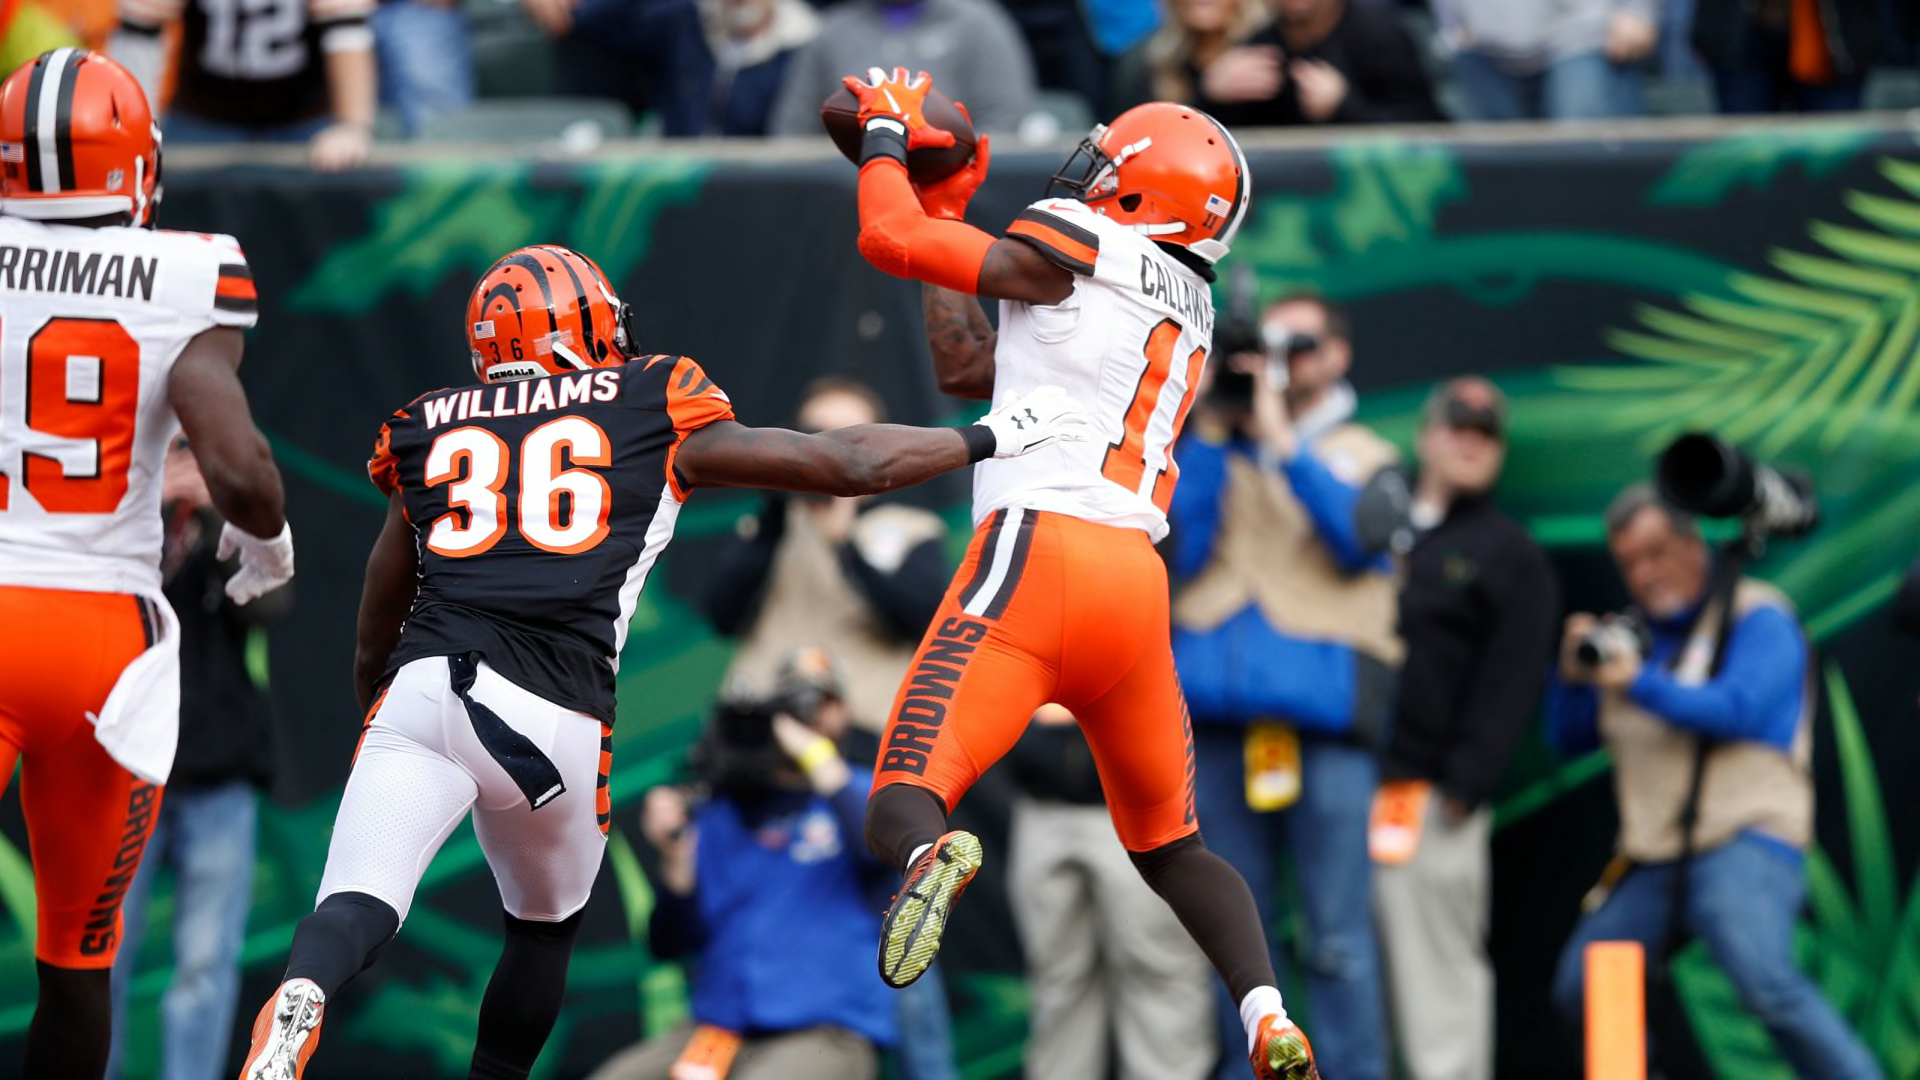 Cleveland Browns vs. Bengals, Week 16 Live stream, channel, game info